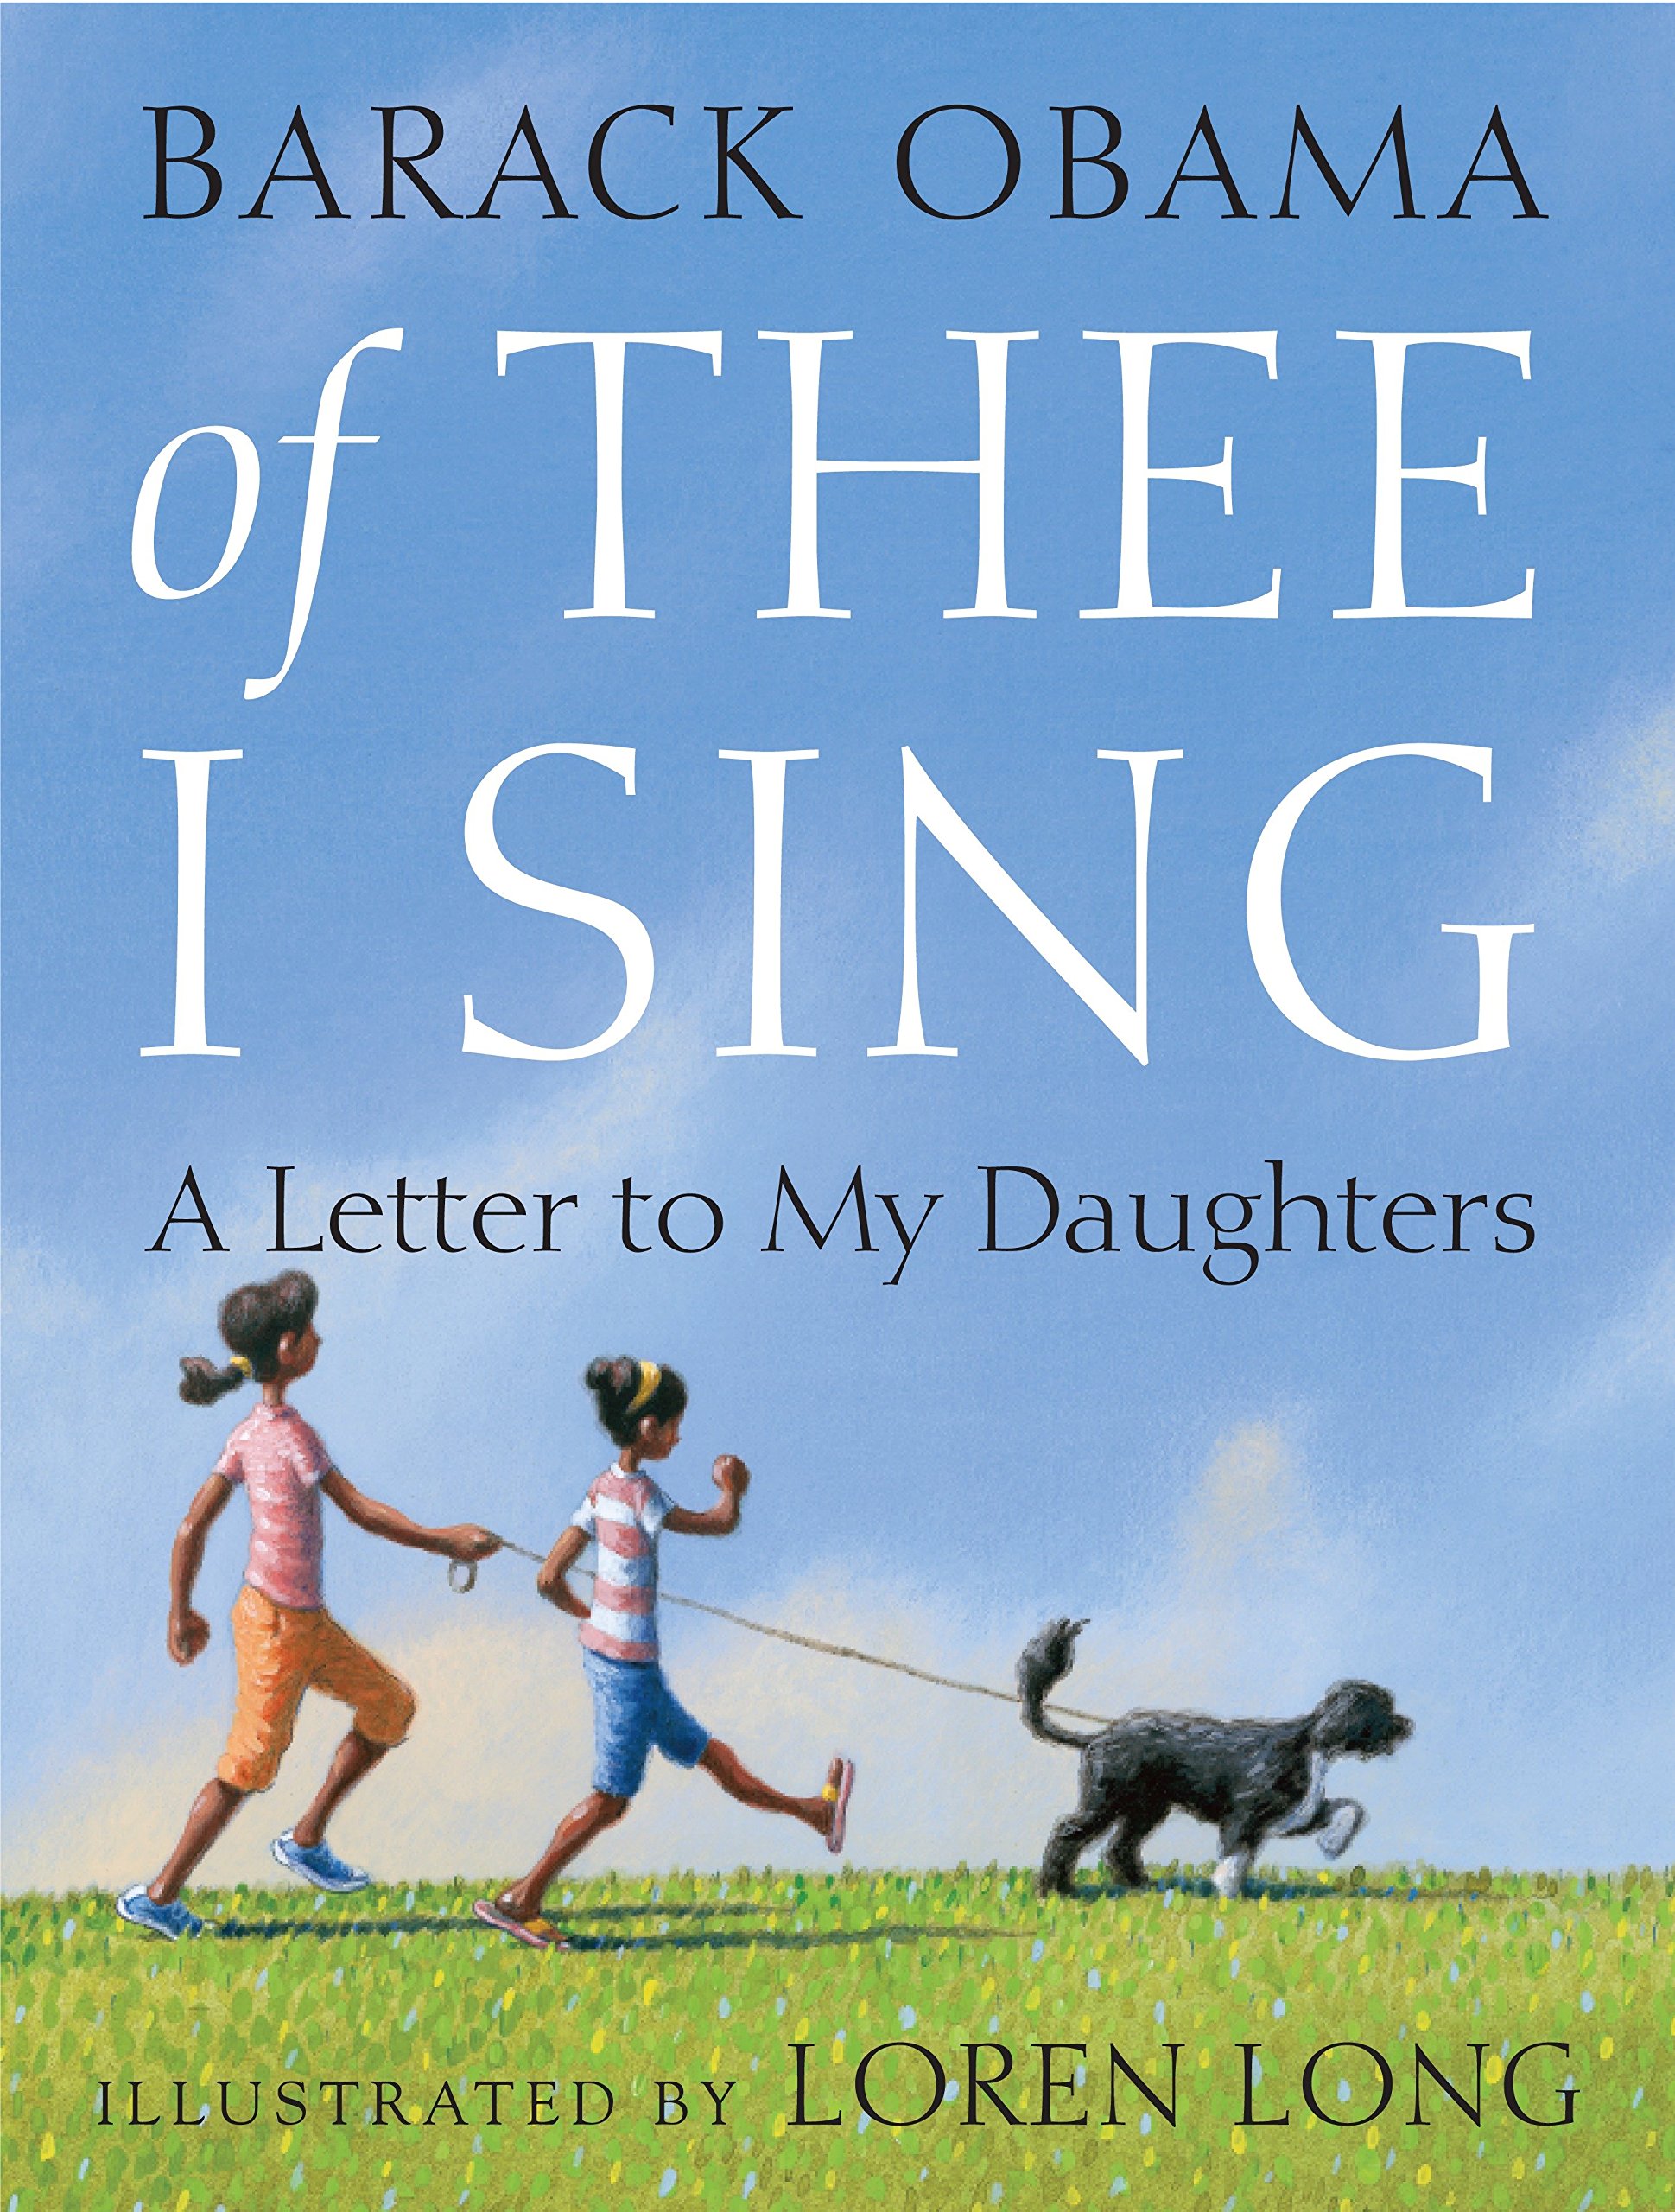 speech and language teaching concepts for Of Thee I Sing in speech therapy​